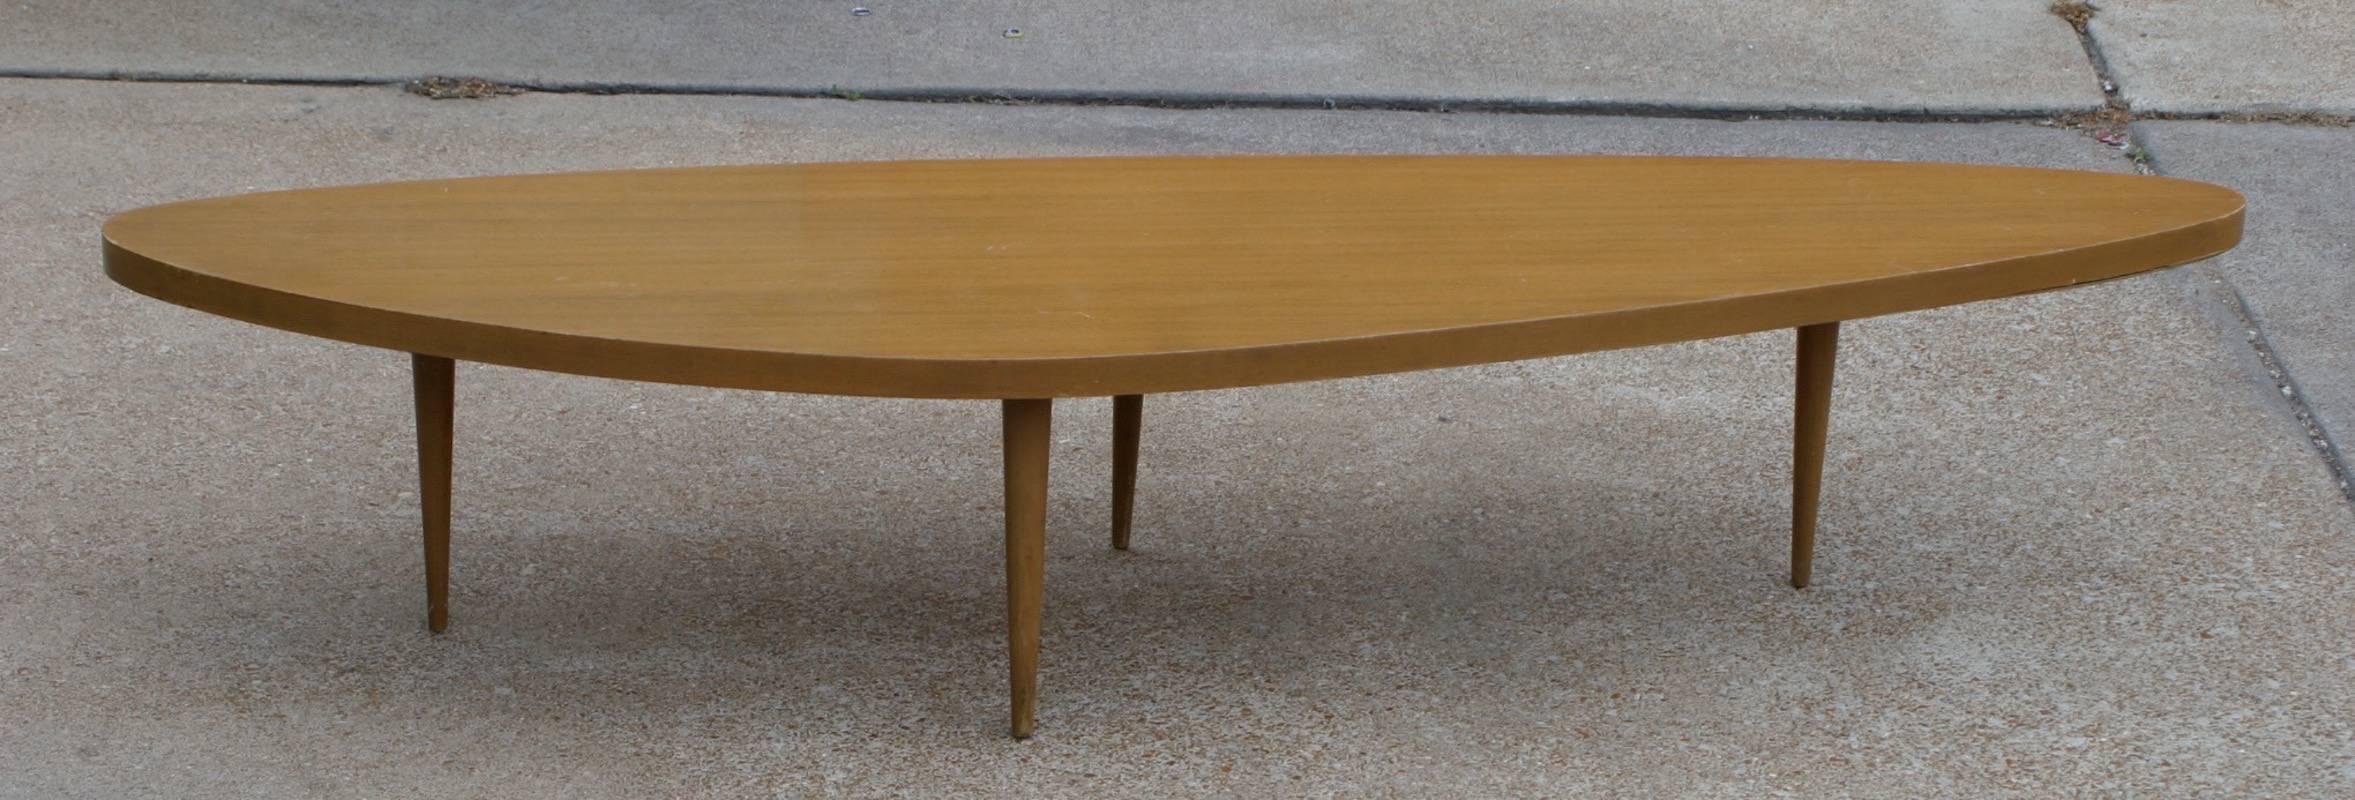 Mid-20th Century Harvey Probber Biomorphic Surfboard Cocktail Coffee Table